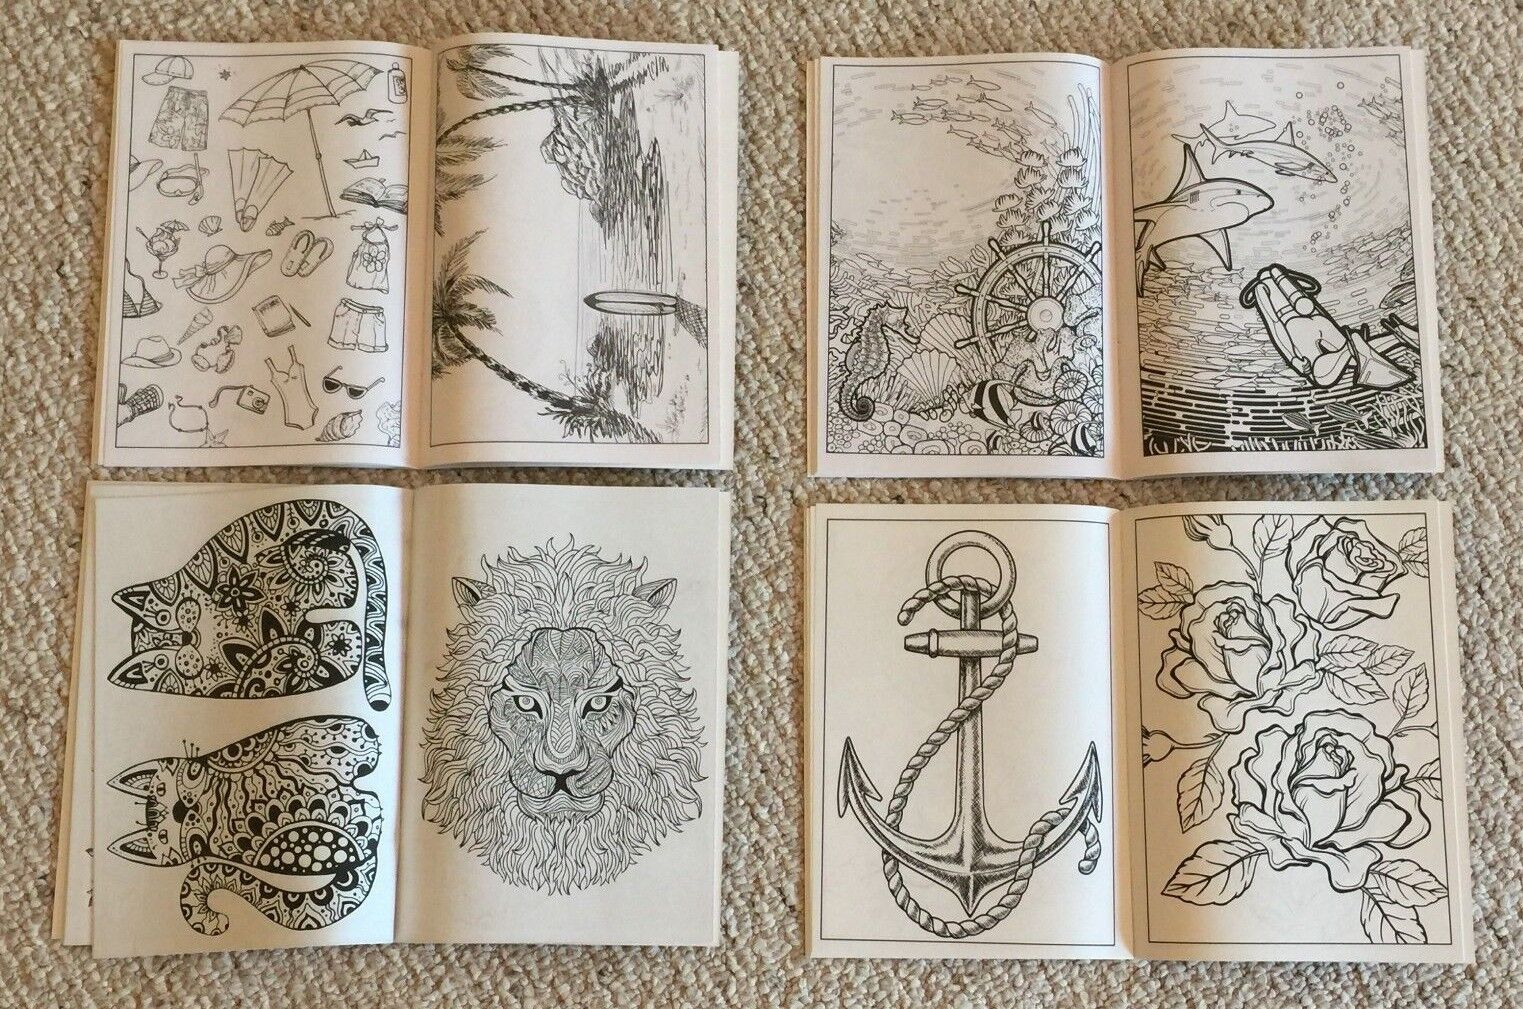 Lot Of 4 New Beach Scenes Fish Cats&Dogs Tattoo Adult Coloring Books BN Grown Up Без бренда - фотография #3